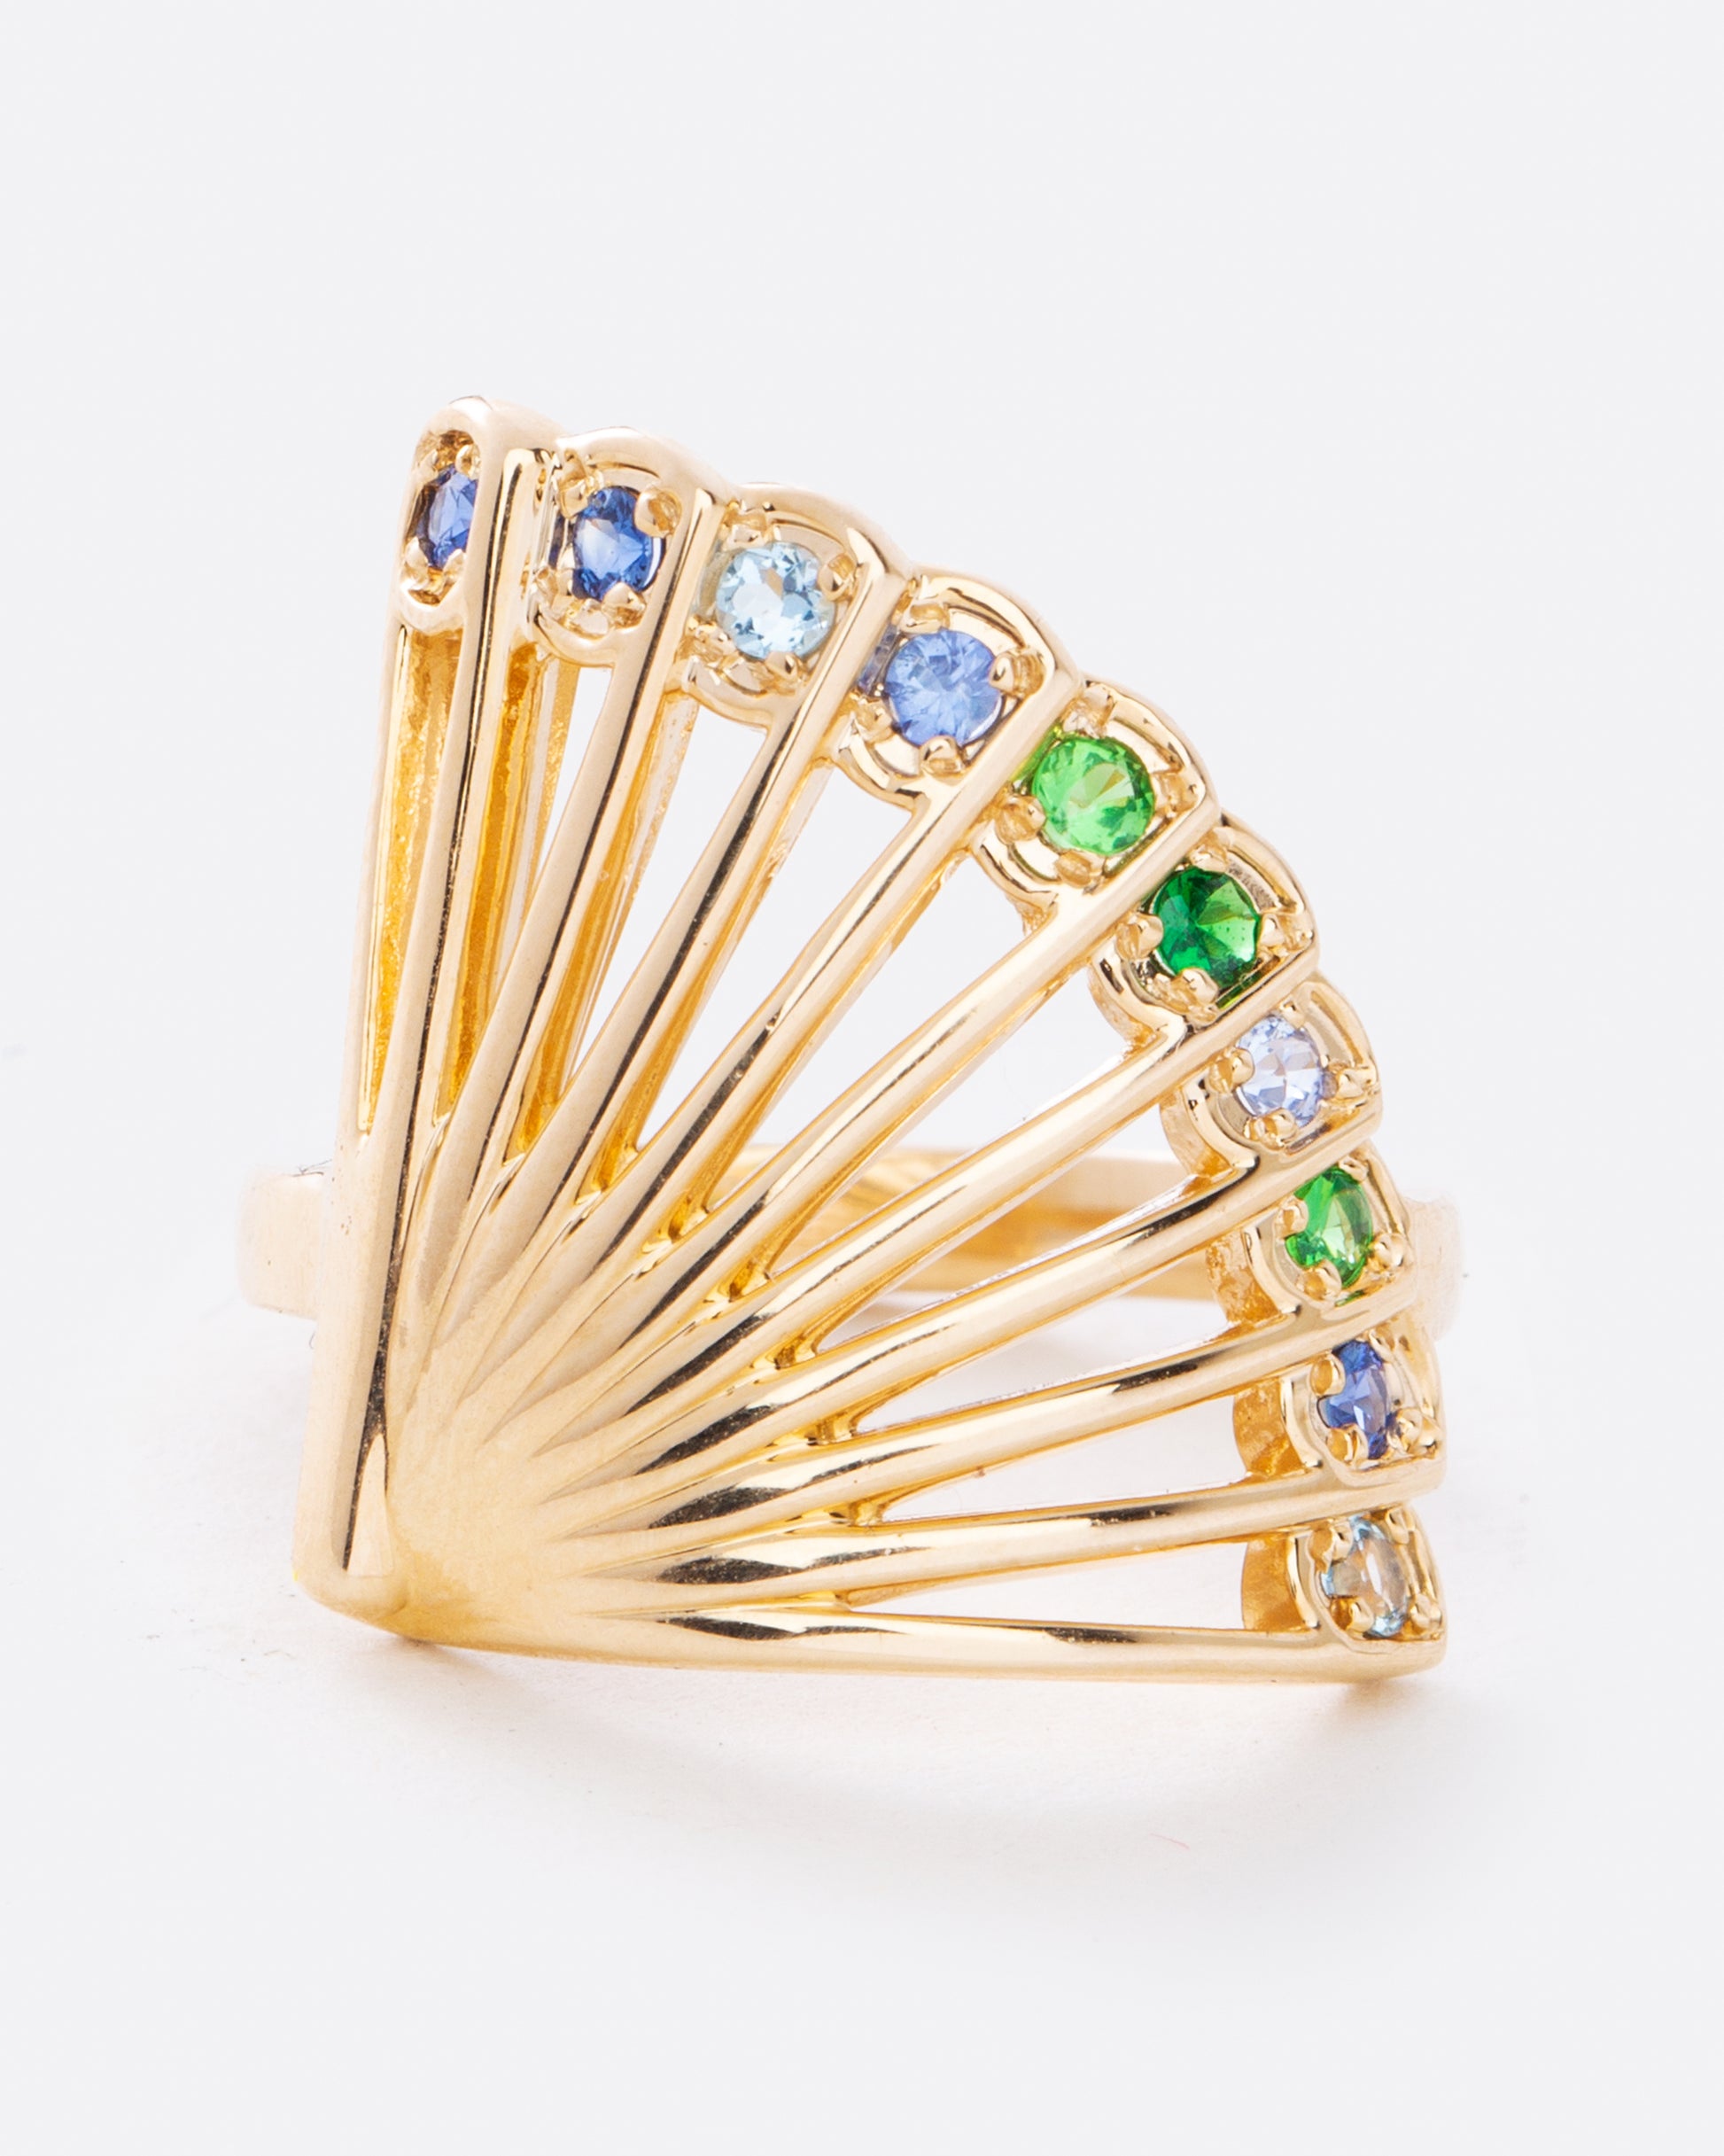 fan shaped ring with large multicolor sapphires along the edge